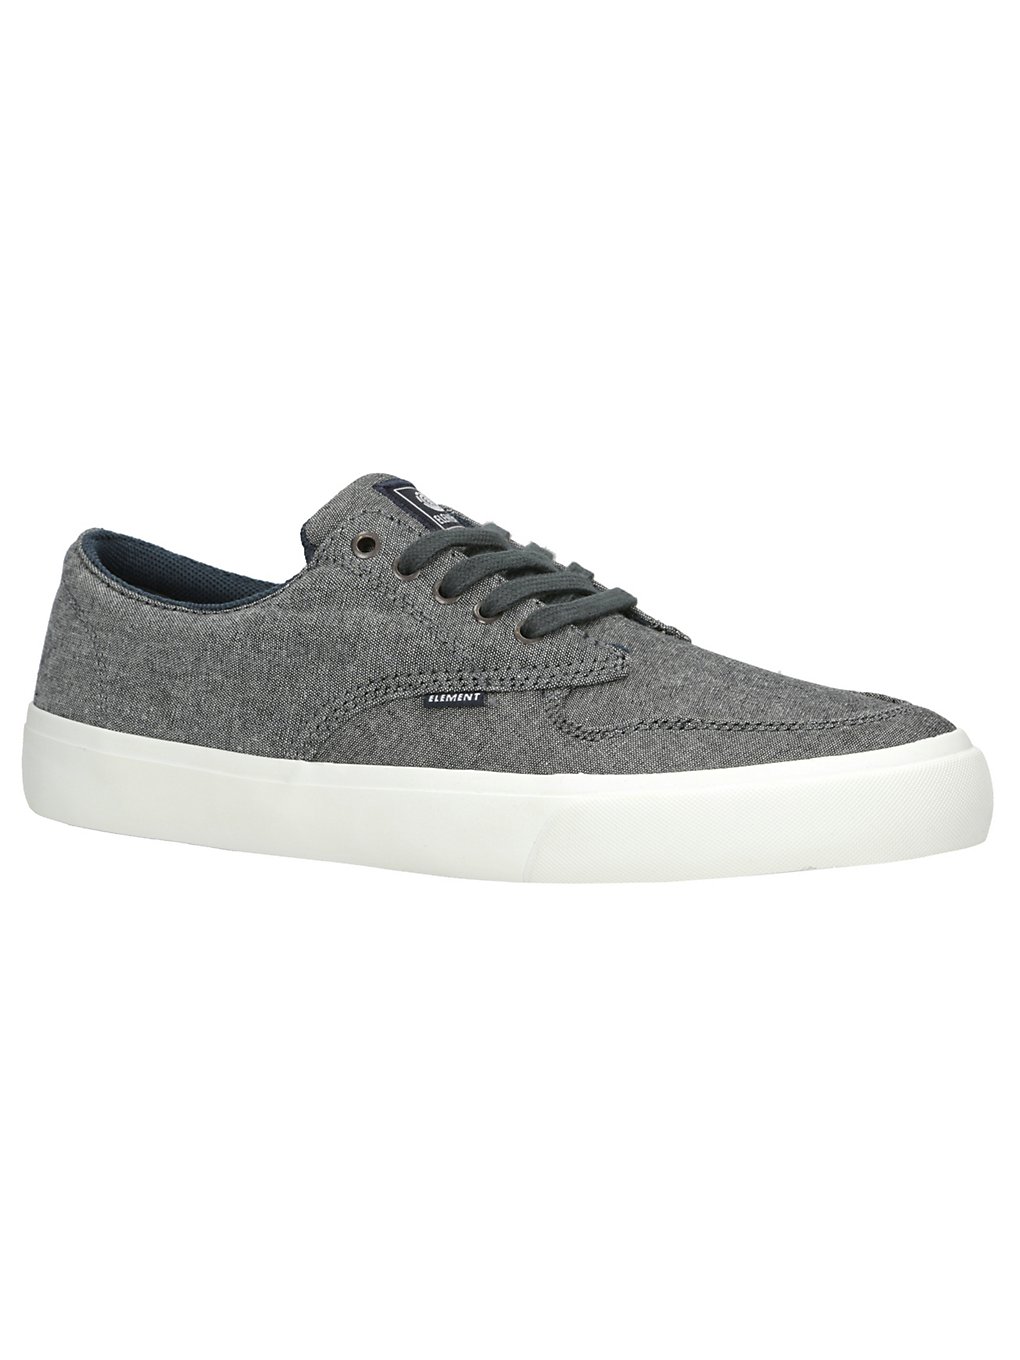 Element Topaz C3 Sneakers stone chambray Gr. 8.0 US